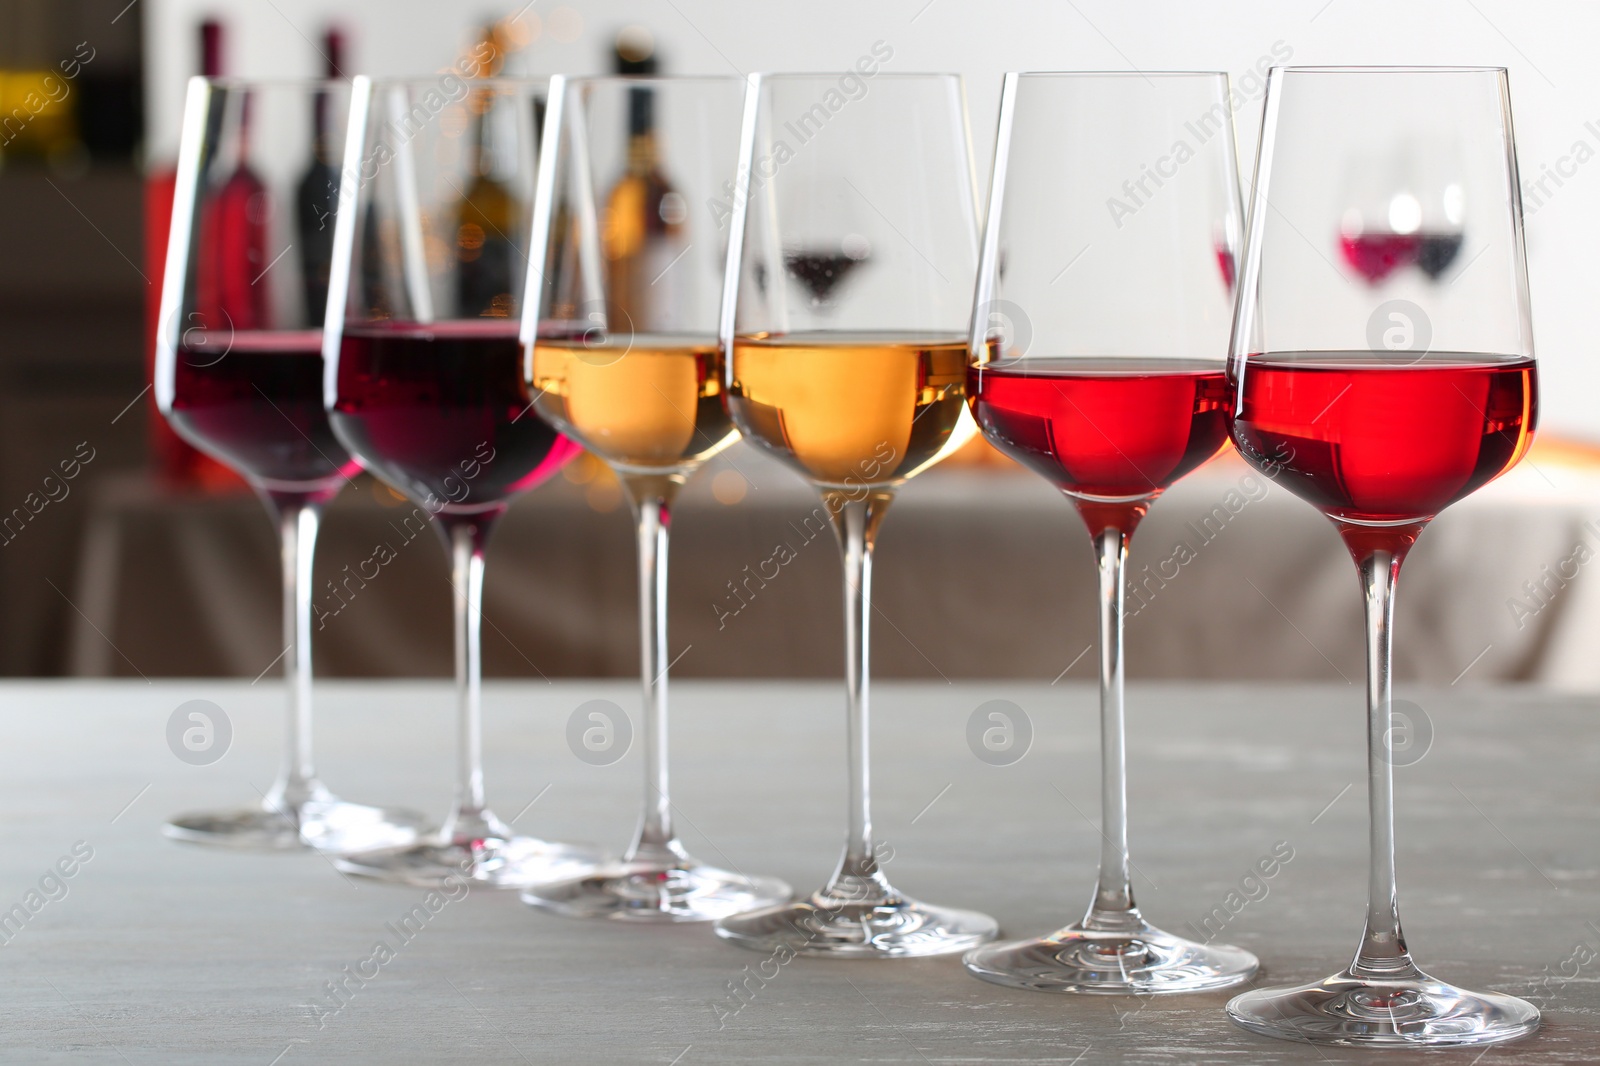 Photo of Row of glasses with different wines on table against blurred background